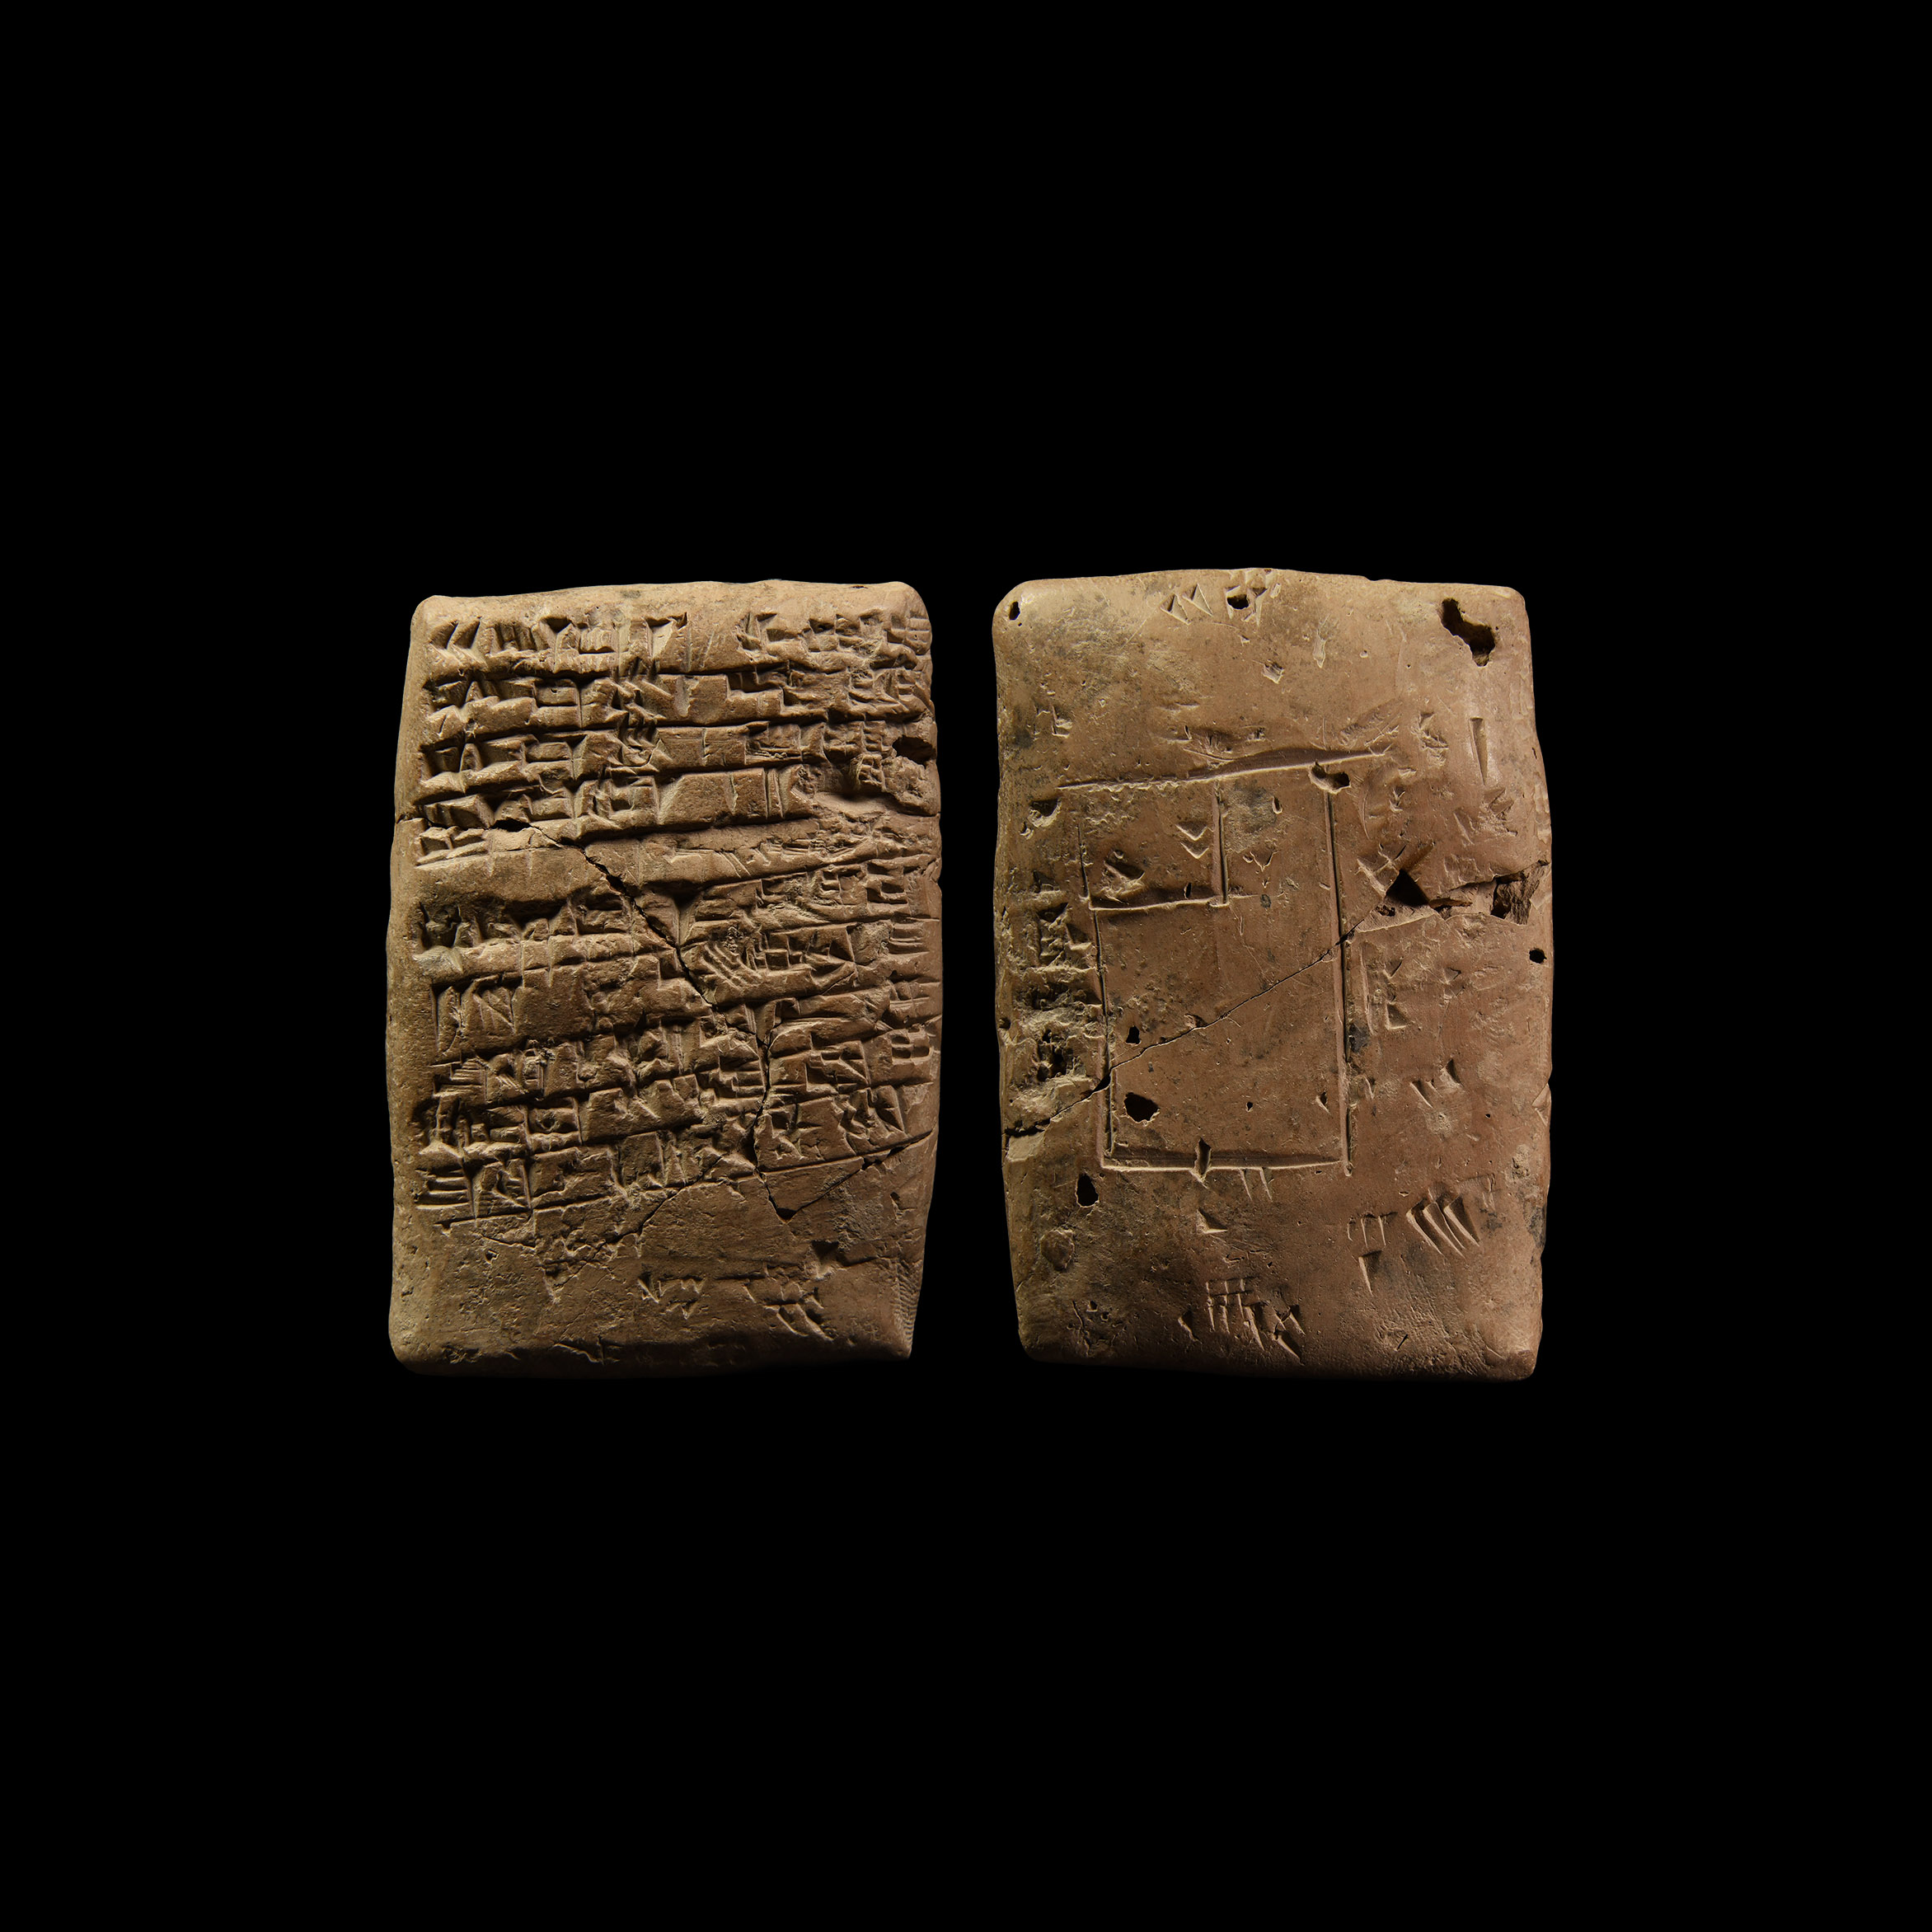 Old Babylonian Cuneiform Tablet with a Field Plan